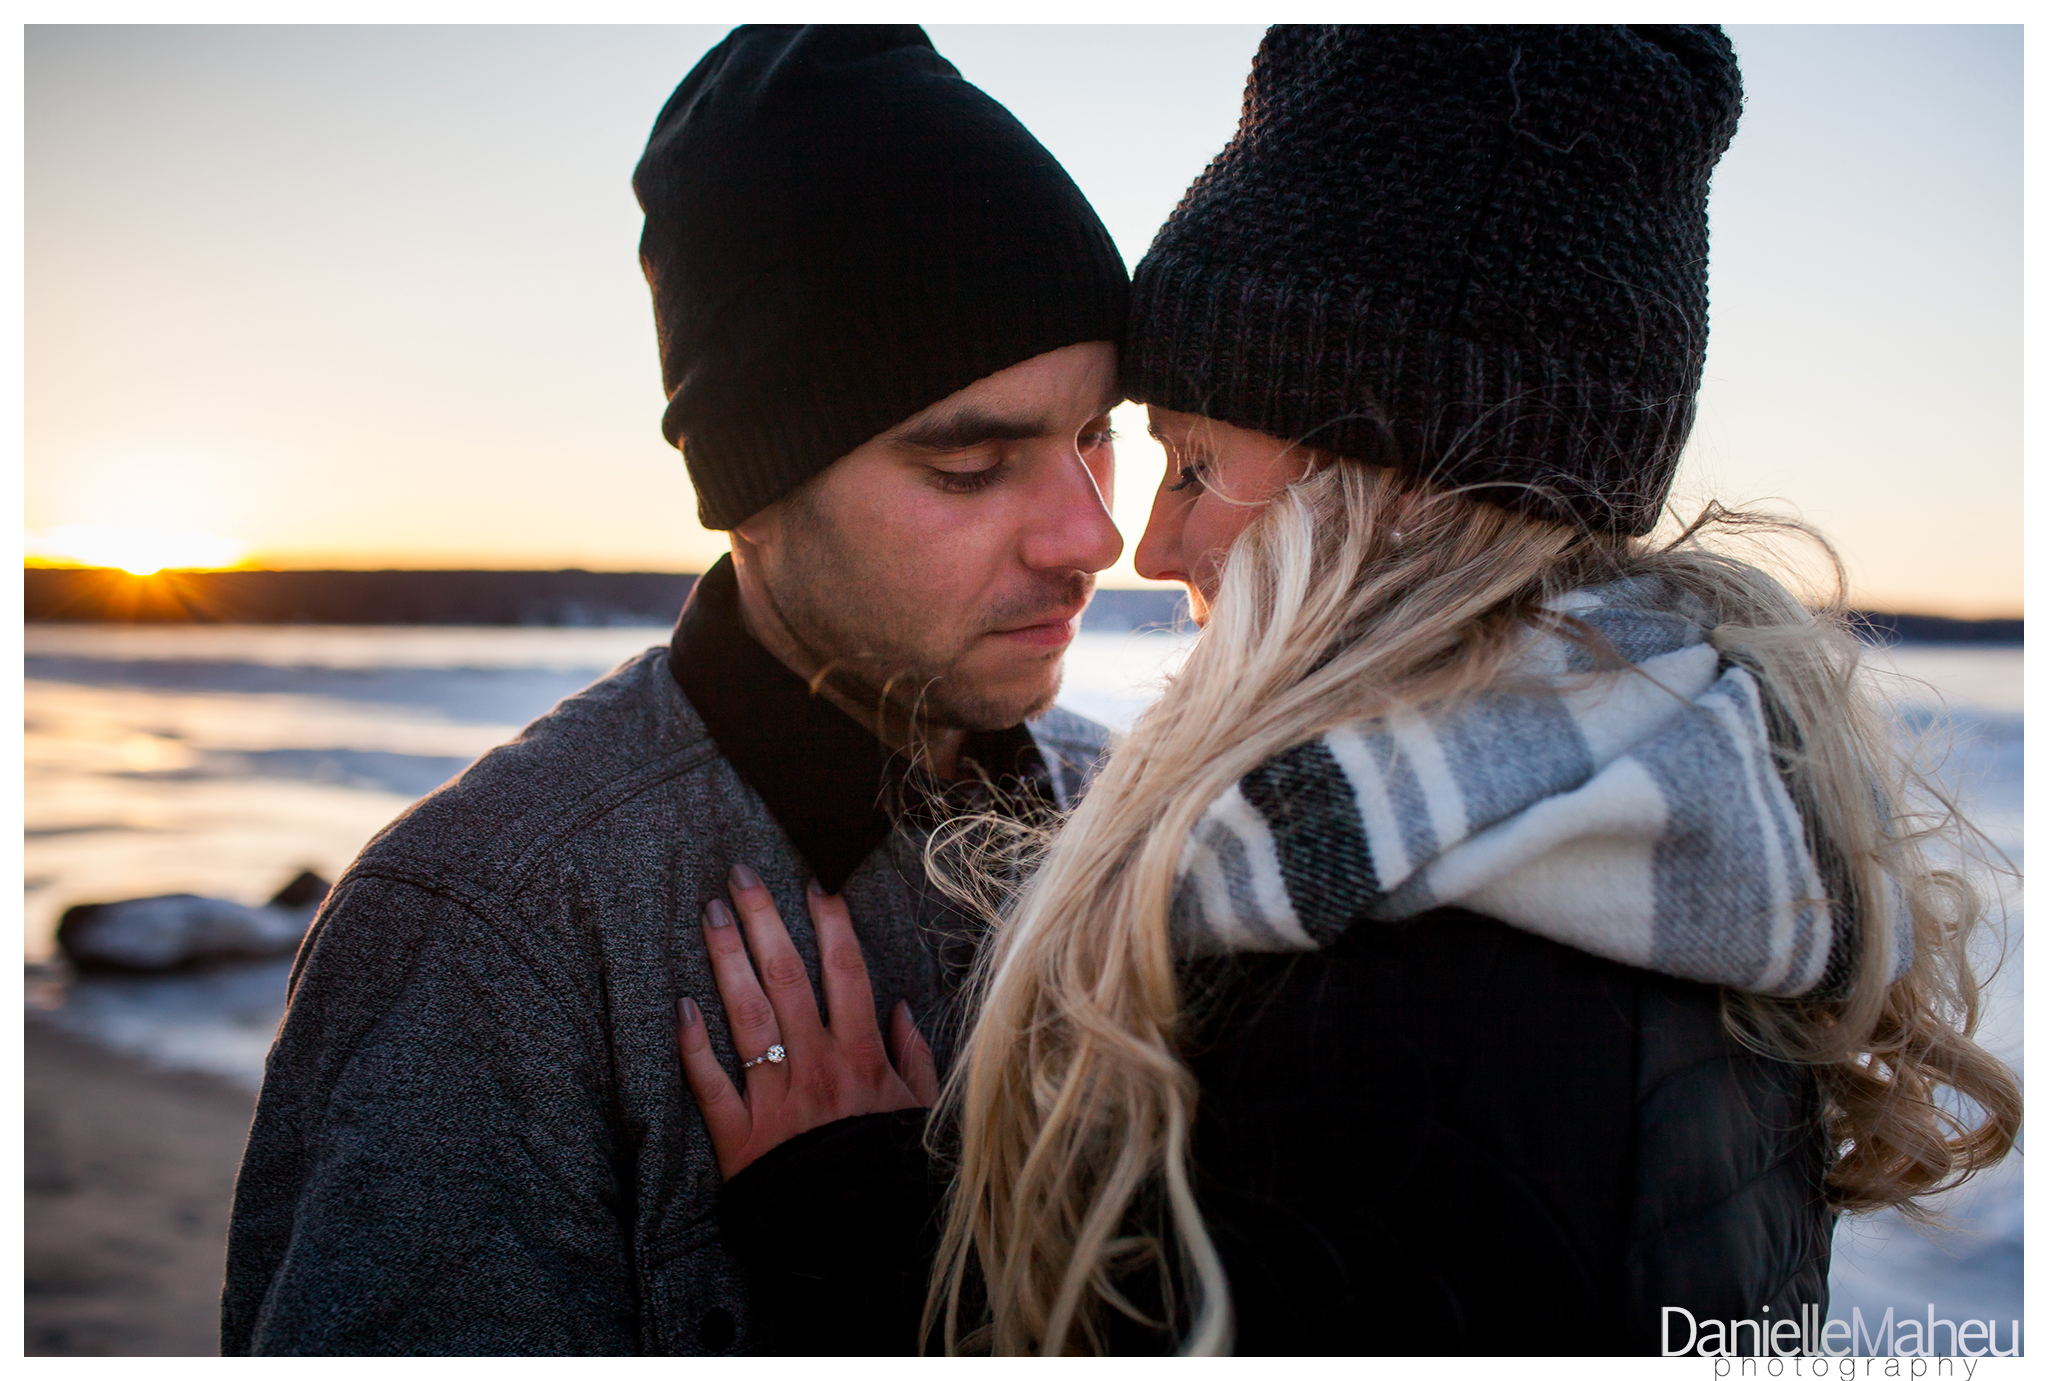 Engaged couple embrace on a beach in winter